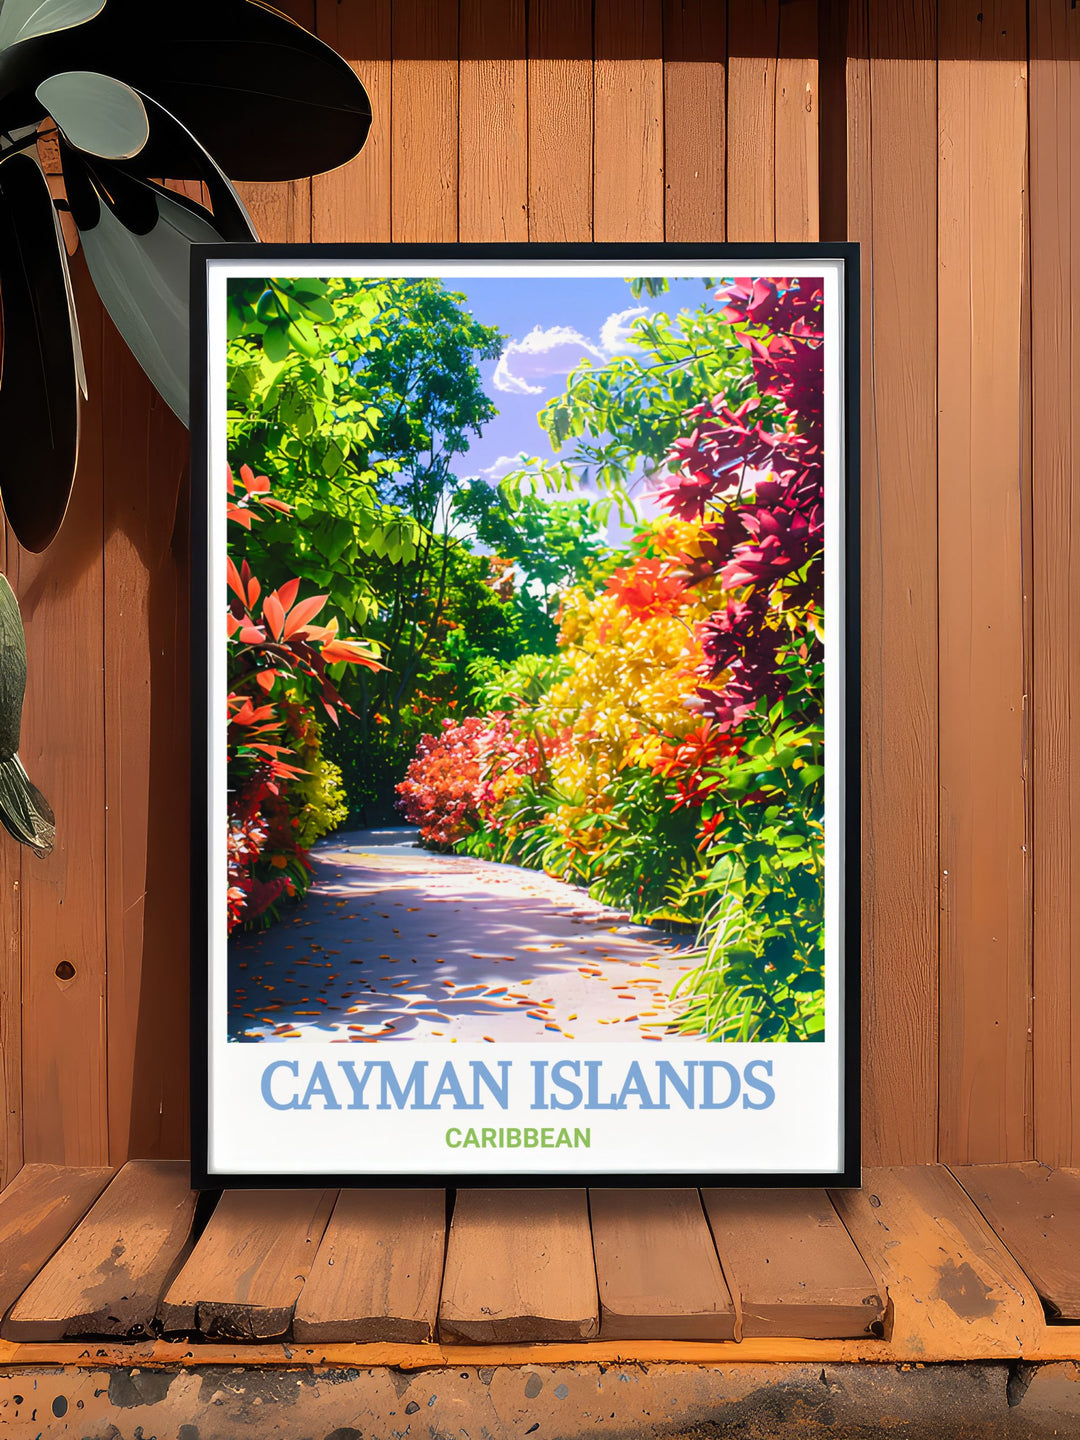 Beautiful Queen Elizabeth II Botanic Park home decor print capturing the essence of the Cayman Islands in a timeless black and white design ideal for travel enthusiasts and art lovers looking to add a touch of the Caribbean to their decor